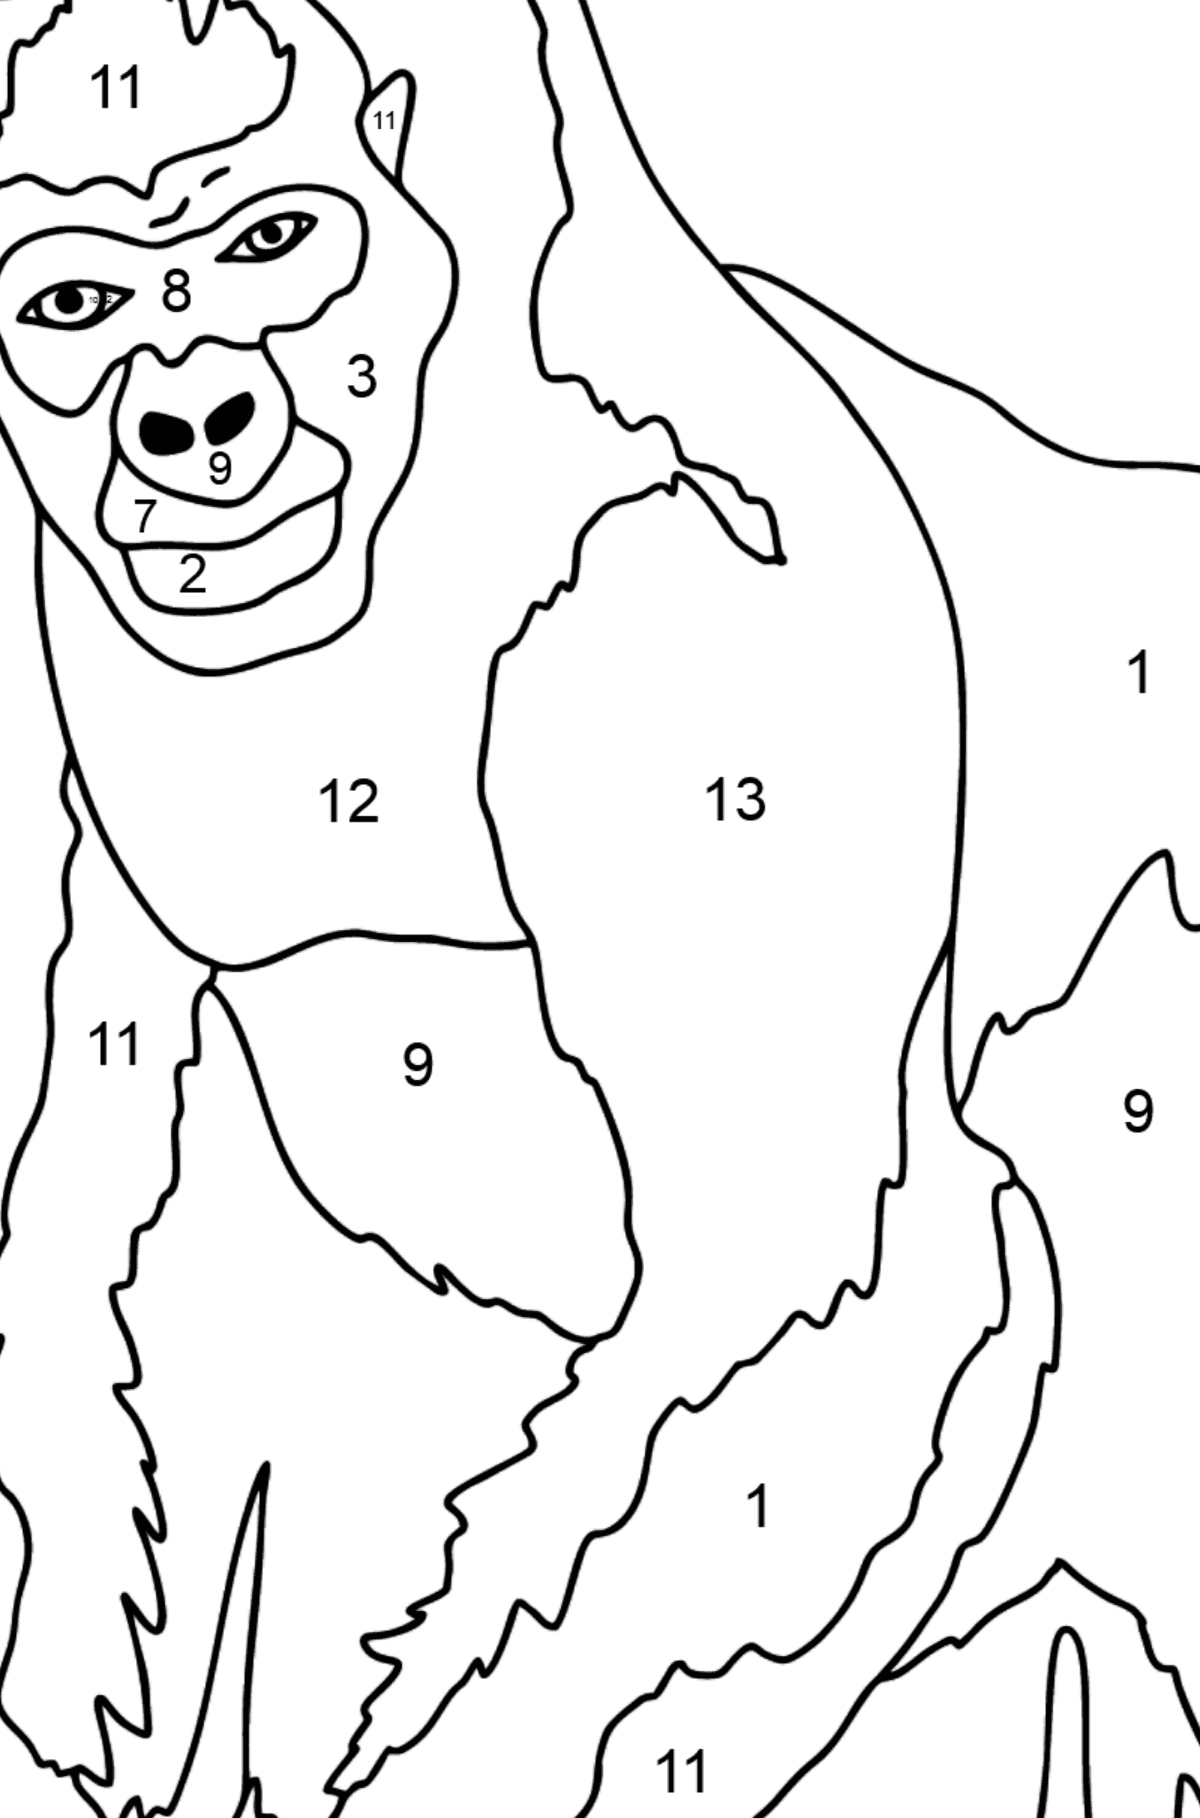 Coloring Page - A Hairy Gorilla - Coloring by Numbers for Kids